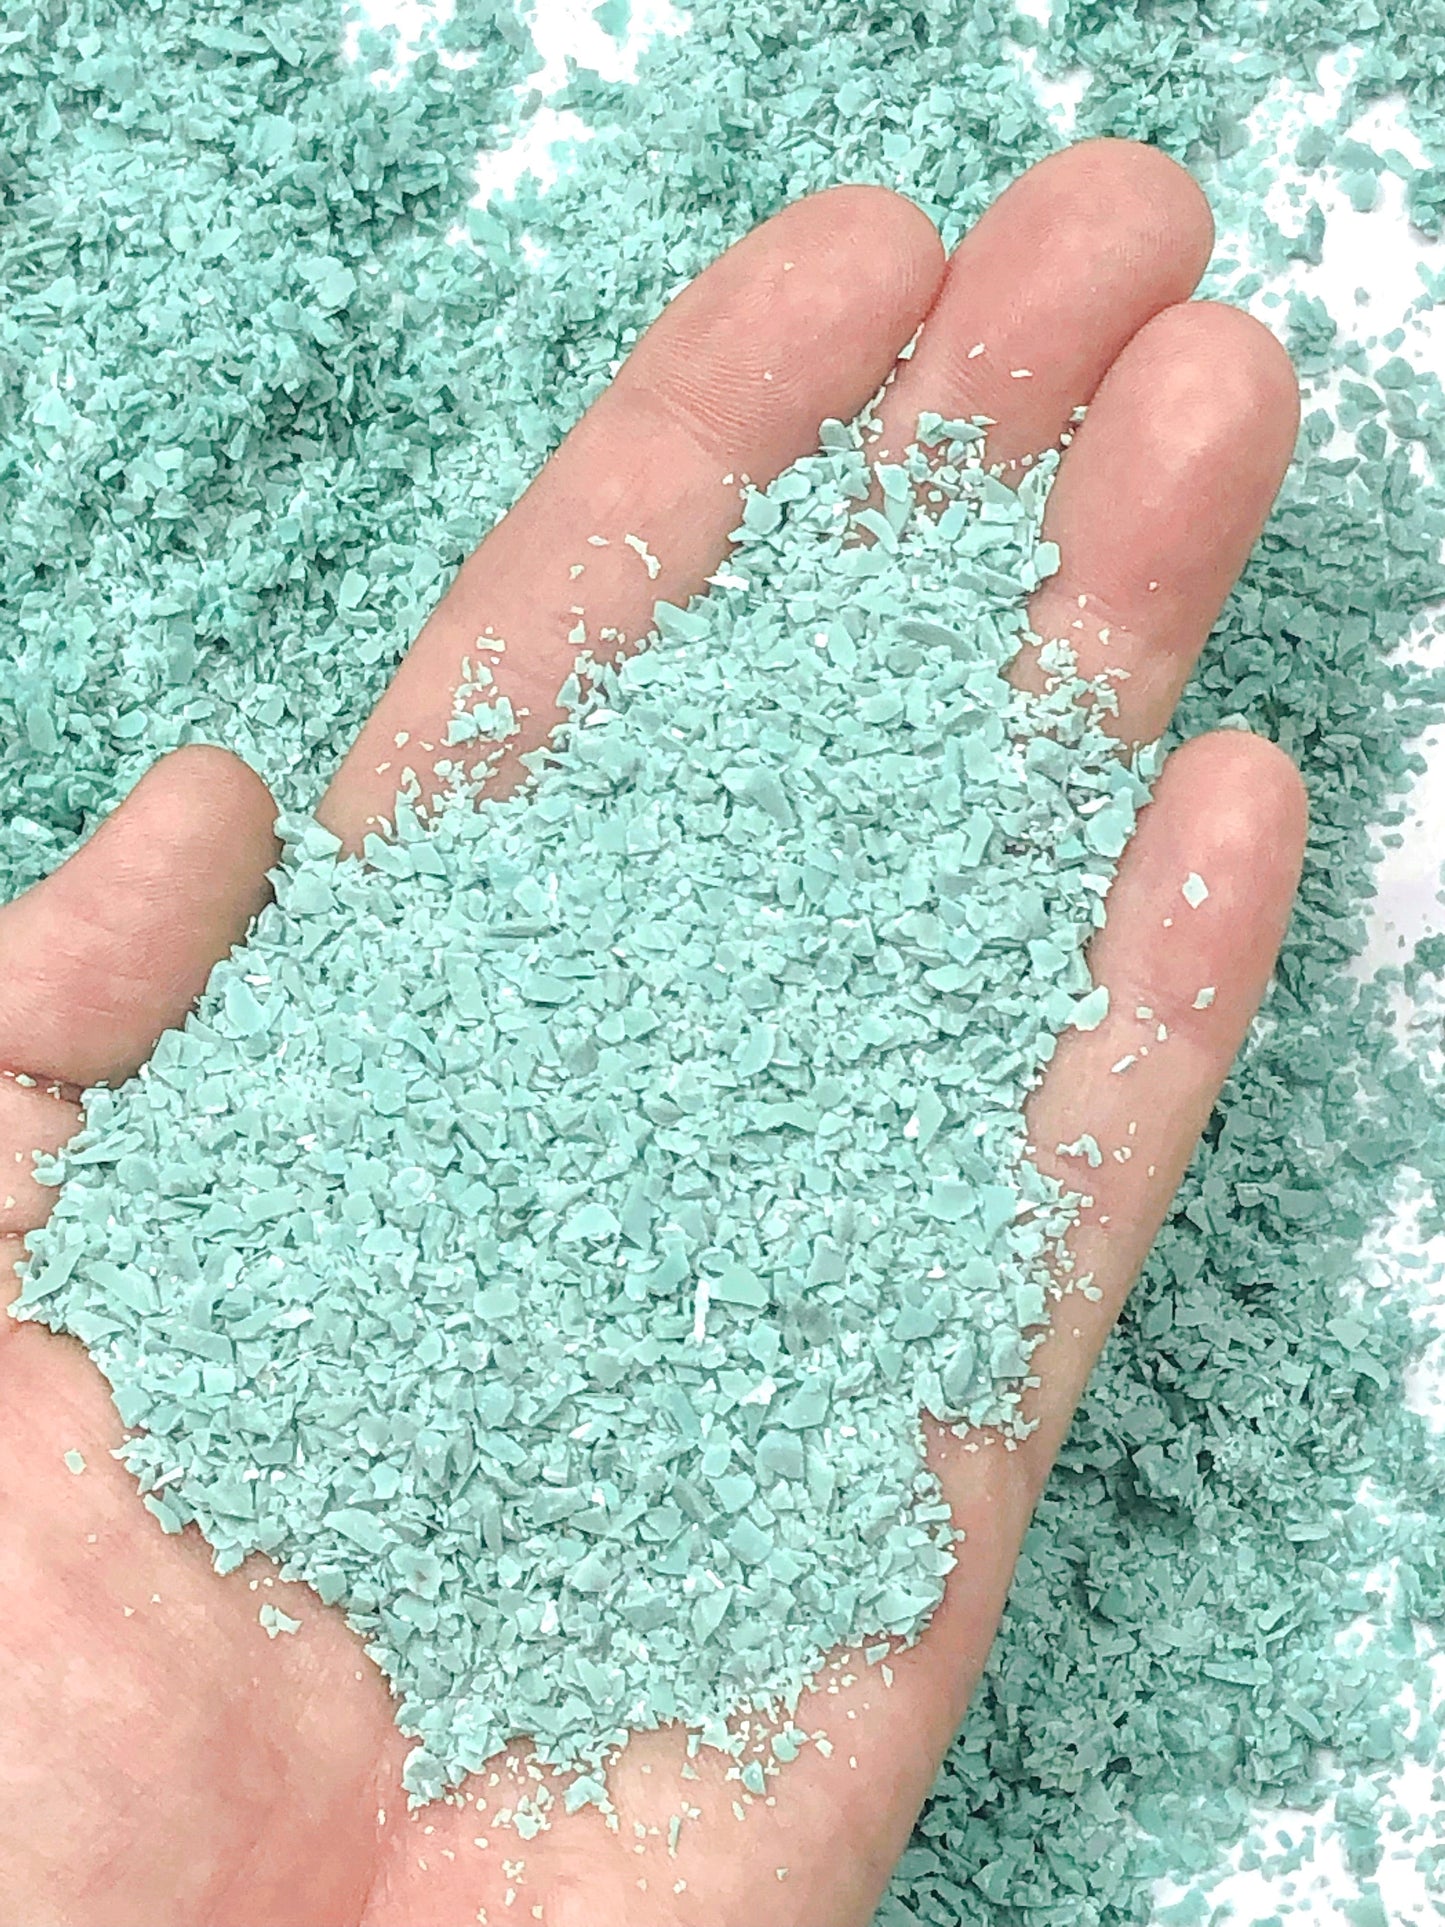 Crushed Blue-Green Turquoise (Lab-Created), Medium Crush, Sand Size, 2mm - 0.25mm